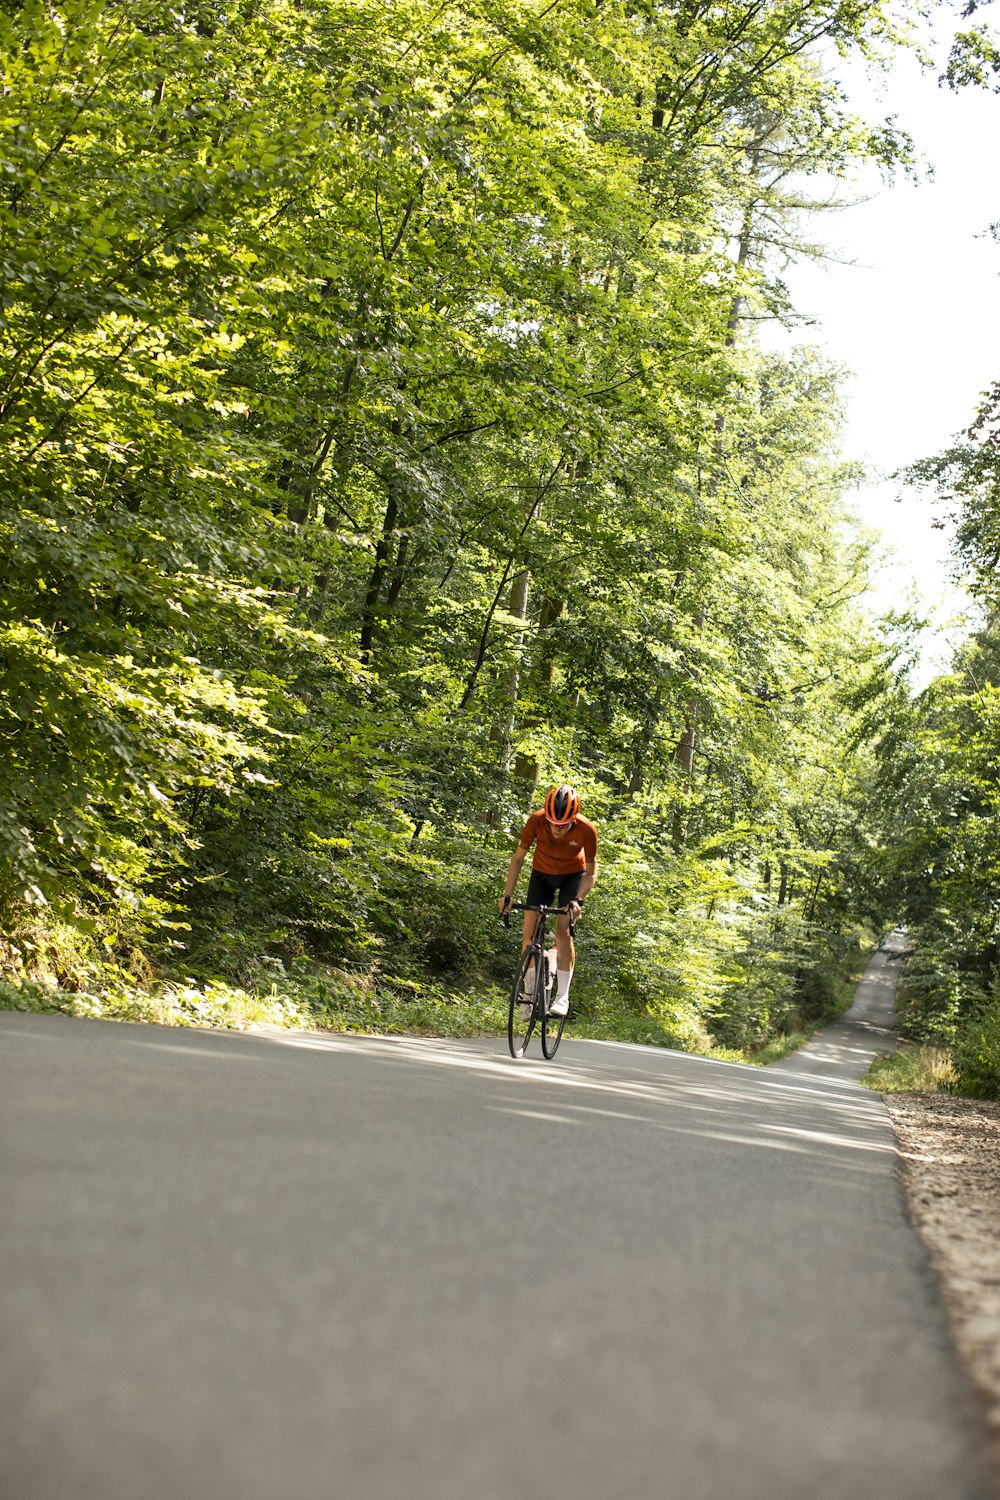 a man riding a bicycle on a road surrounded by trees